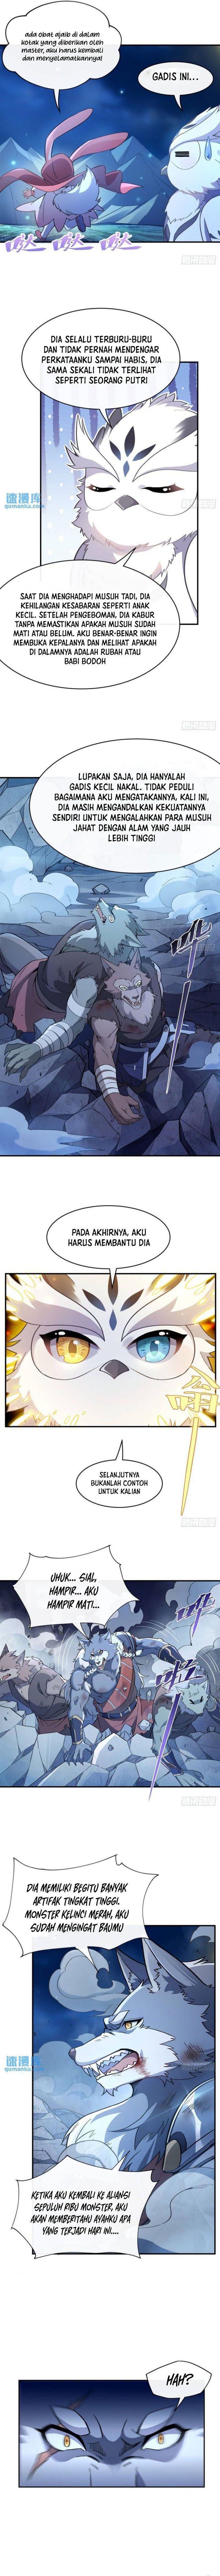 Dilarang COPAS - situs resmi www.mangacanblog.com - Komik my female apprentices are all big shots from the future 193 - chapter 193 194 Indonesia my female apprentices are all big shots from the future 193 - chapter 193 Terbaru 3|Baca Manga Komik Indonesia|Mangacan